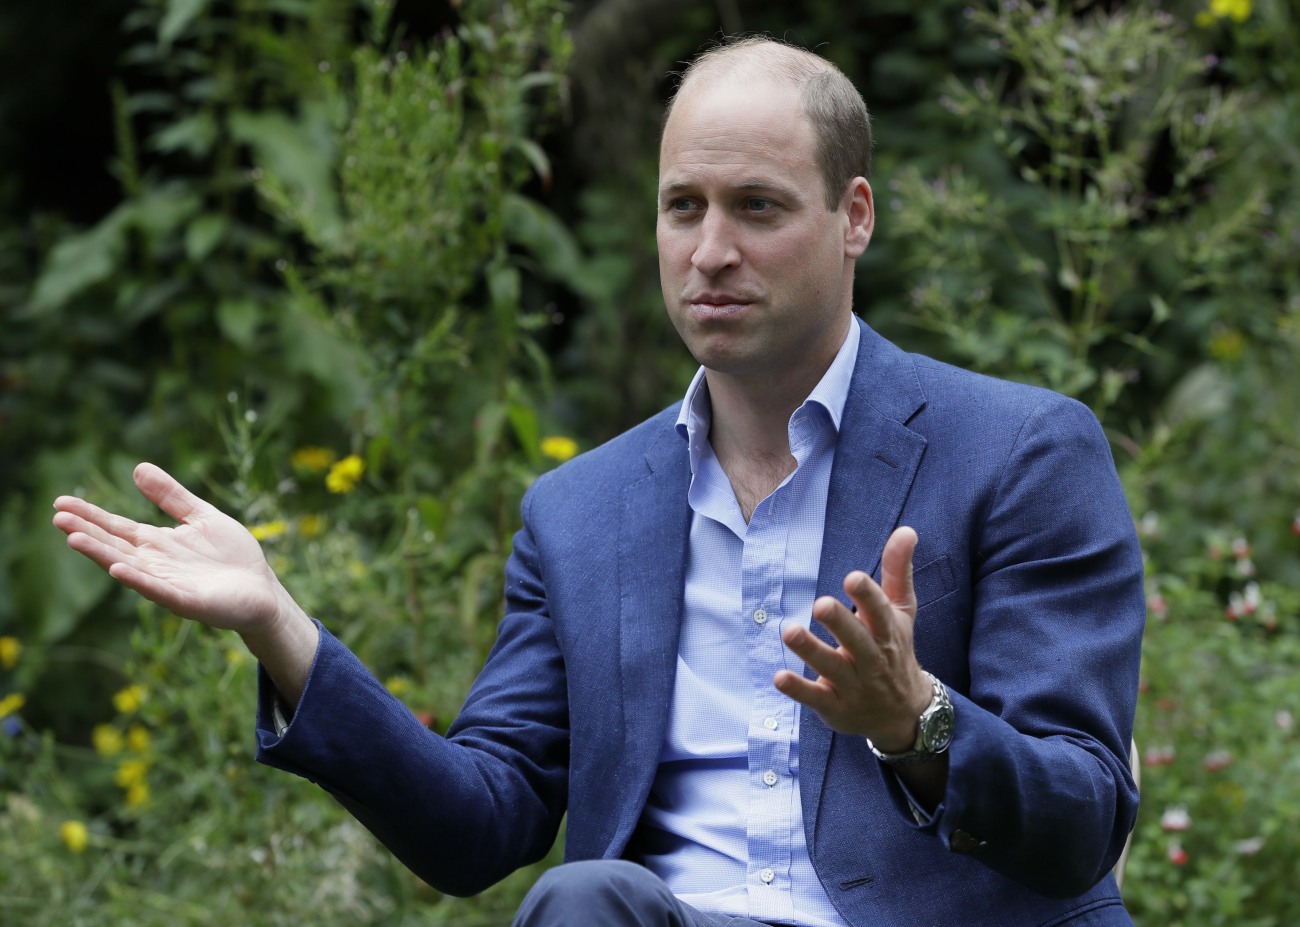 Britain's Prince William speaks with service users during a visit to the Garden House part of the Light Project in Peterborough, England, Thursday, July 16, 2020. The Garden House offers information, advice and support to the rough sleepers in Peterborough.